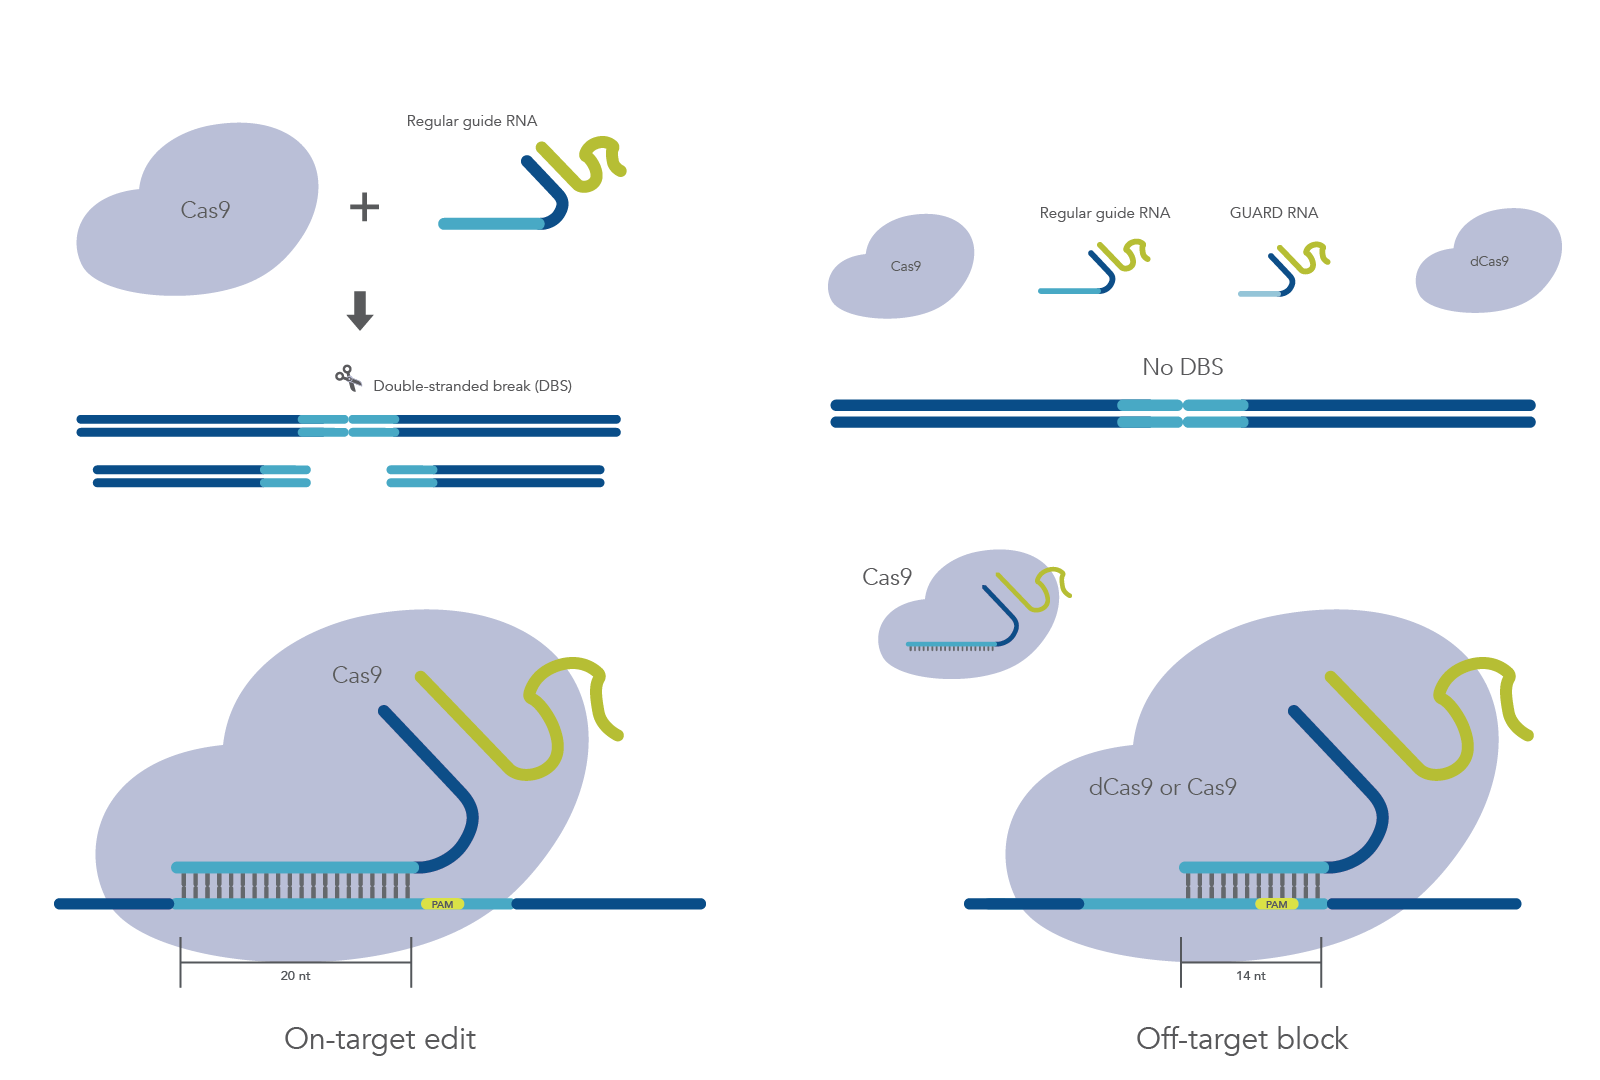 CRISPR GUARD uses short gRNAs to block off-target effects in genome editing